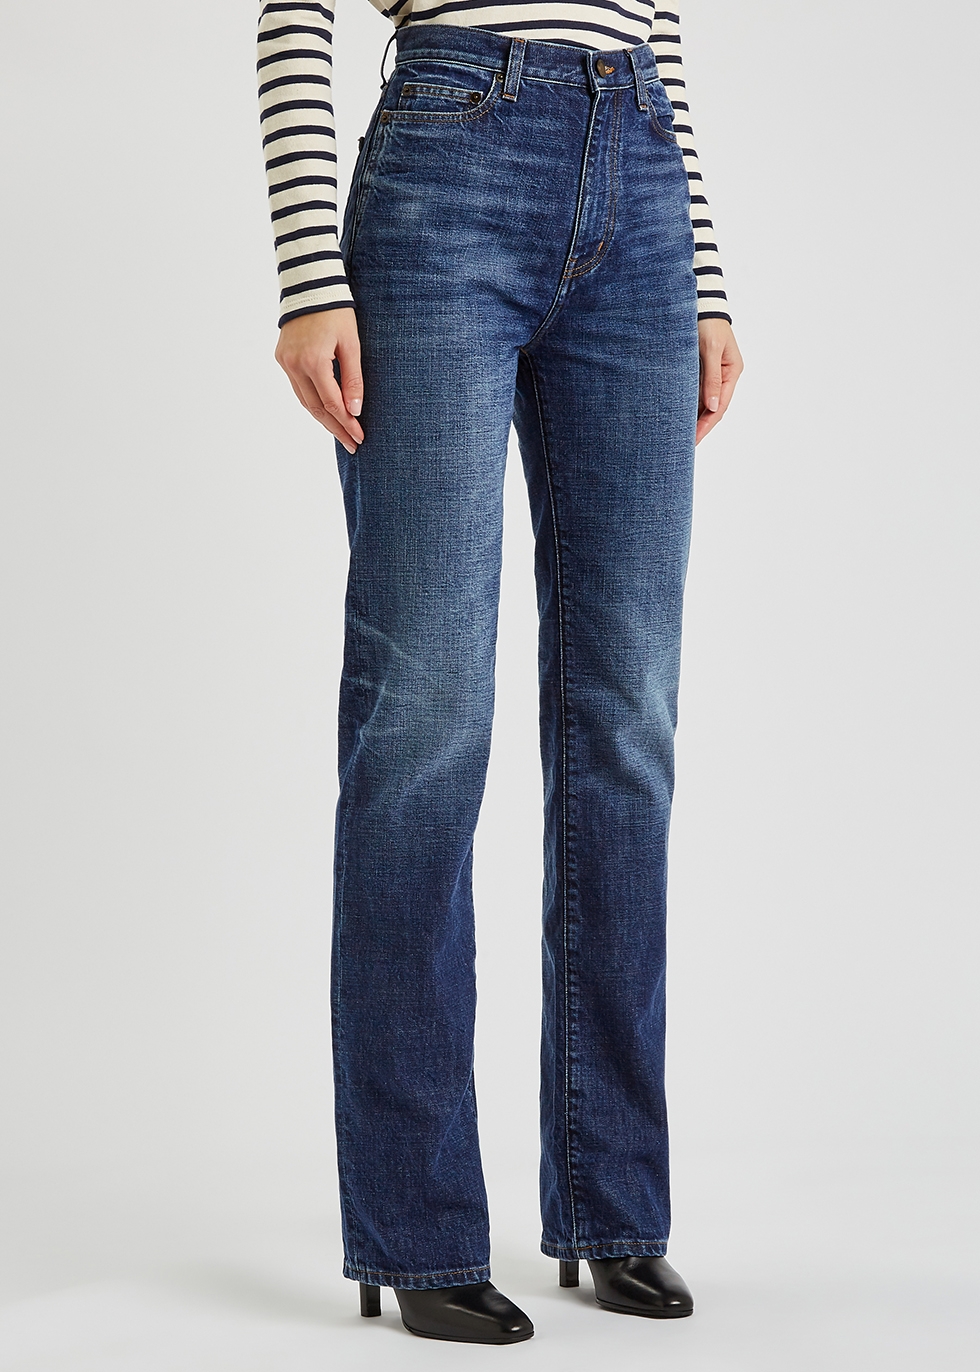 Saint Laurent Cotton High-rise Straight Jeans in Blue Womens Clothing Jeans Straight-leg jeans 